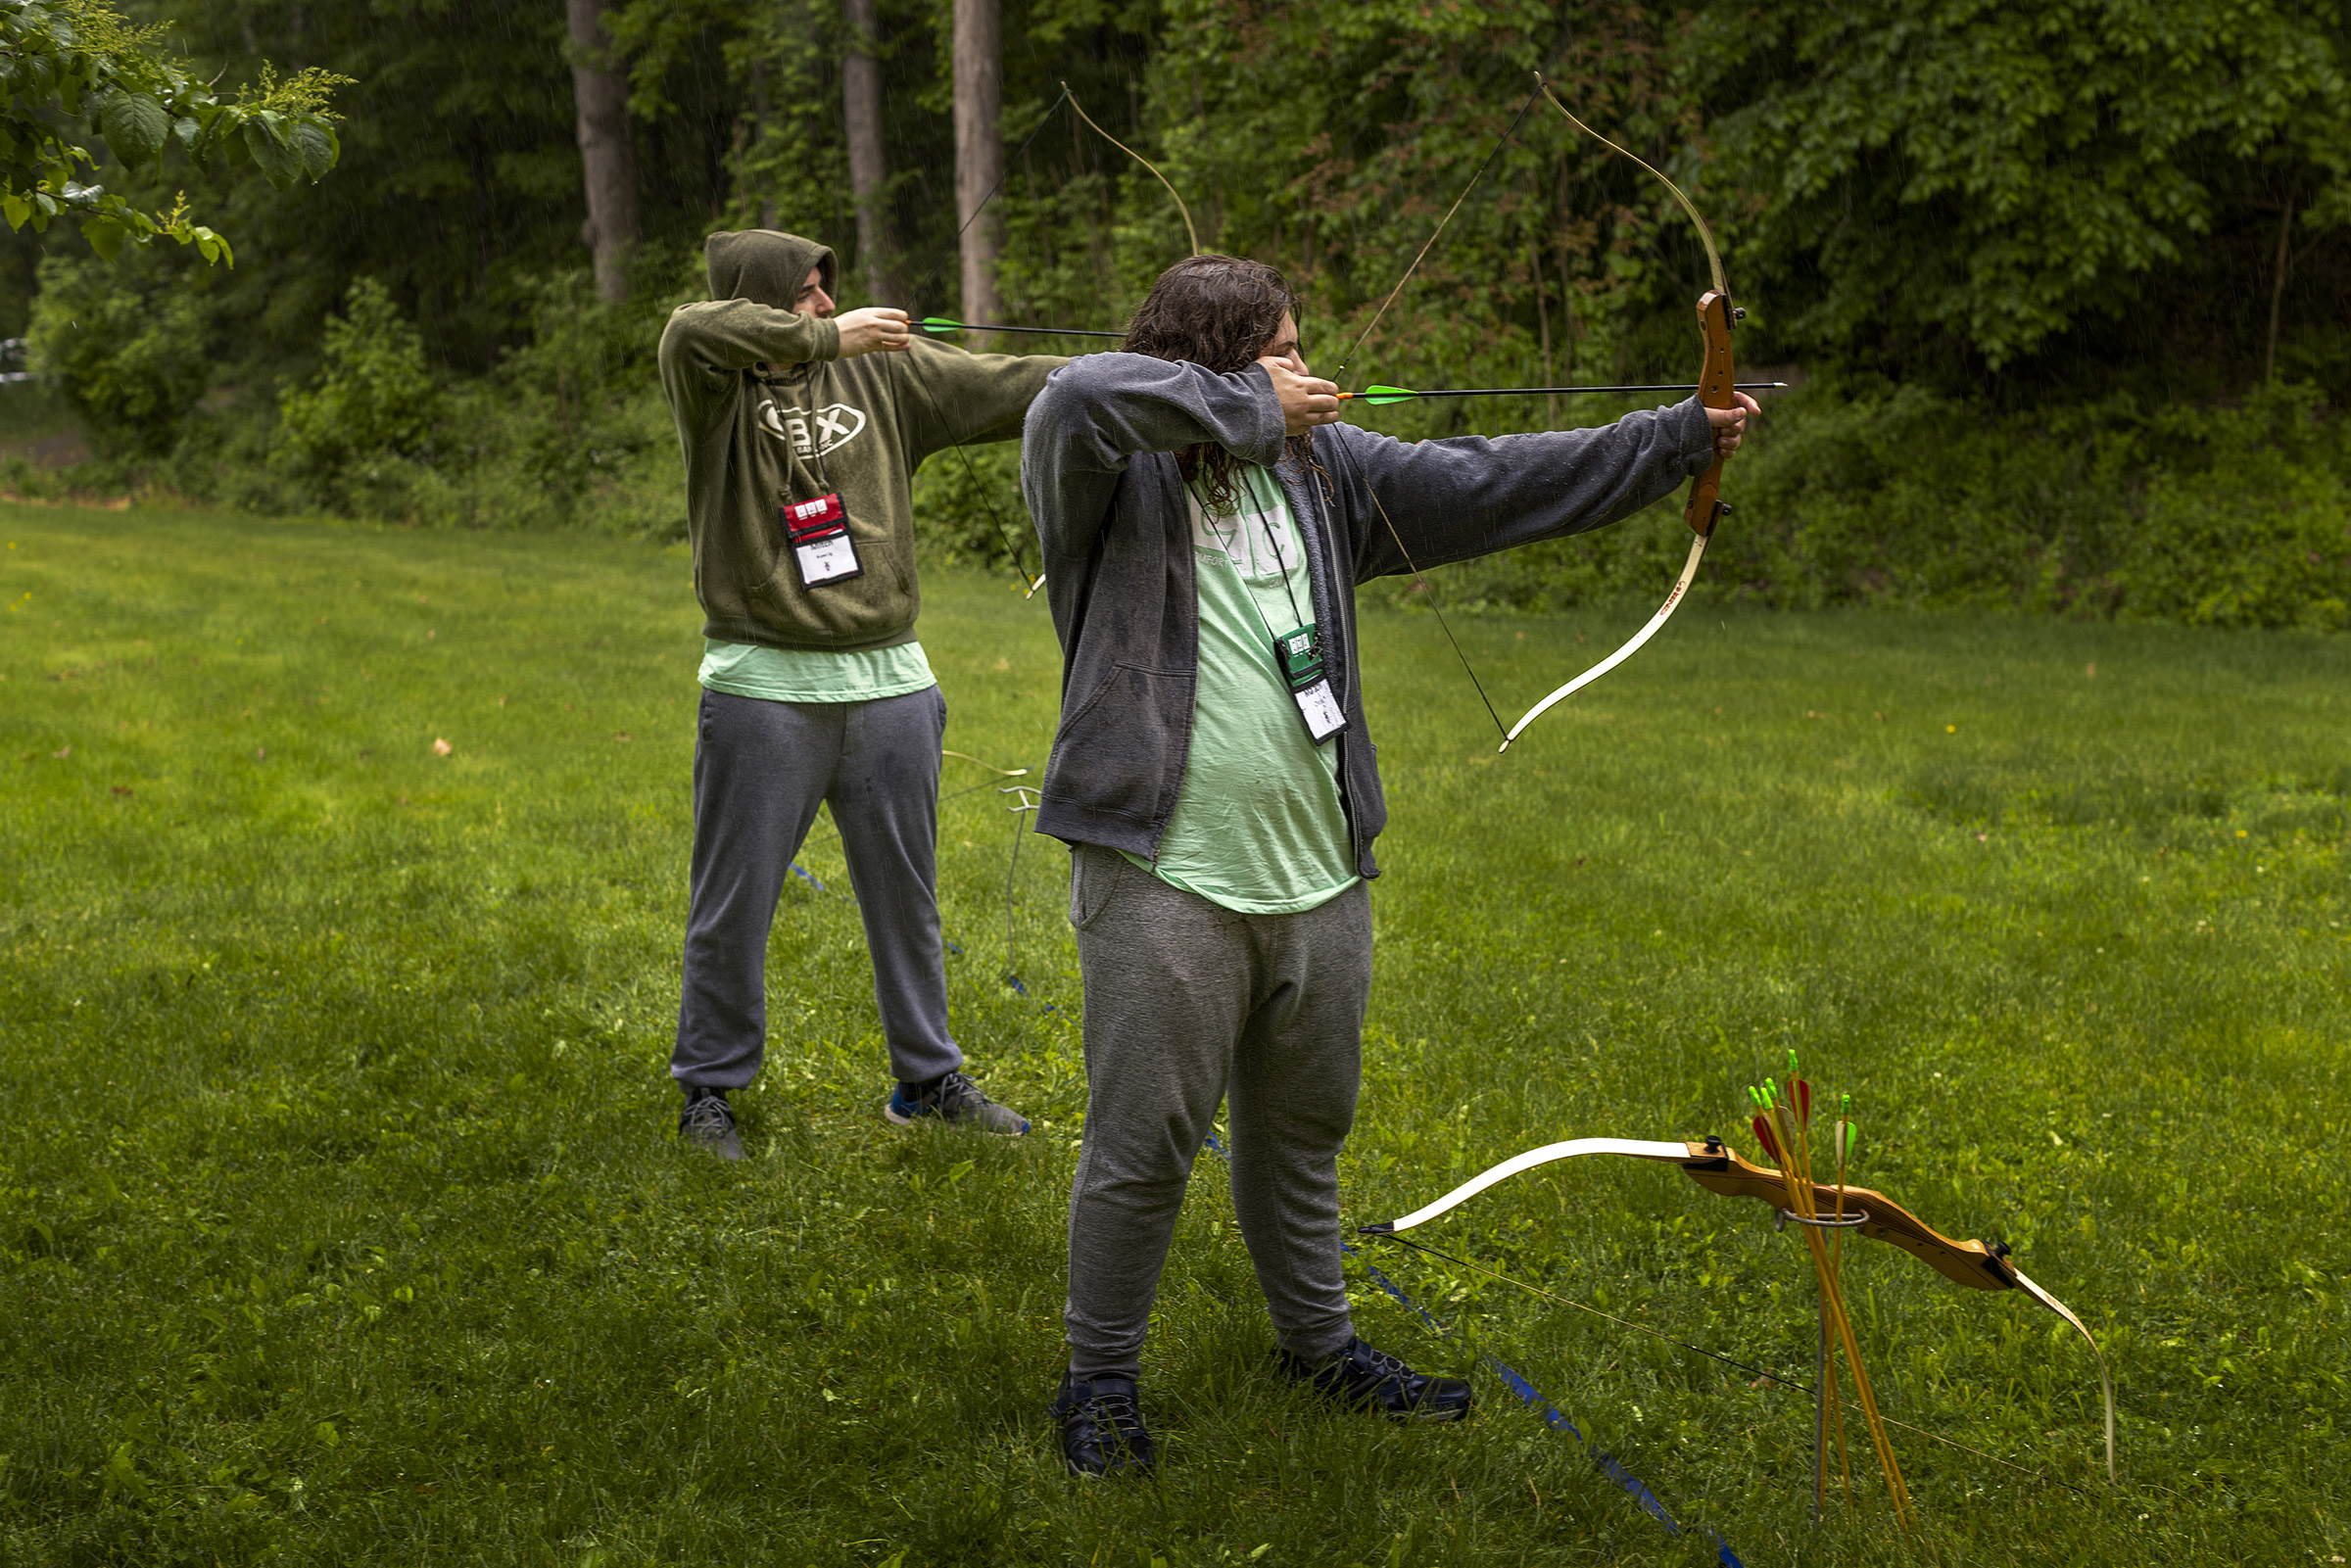 “You can talk without any fears” in camp healing circles, says camper Malachi Chassé, right. “You can share. Everyone’s going to understand.” (Ilona Szwarc for TIME)